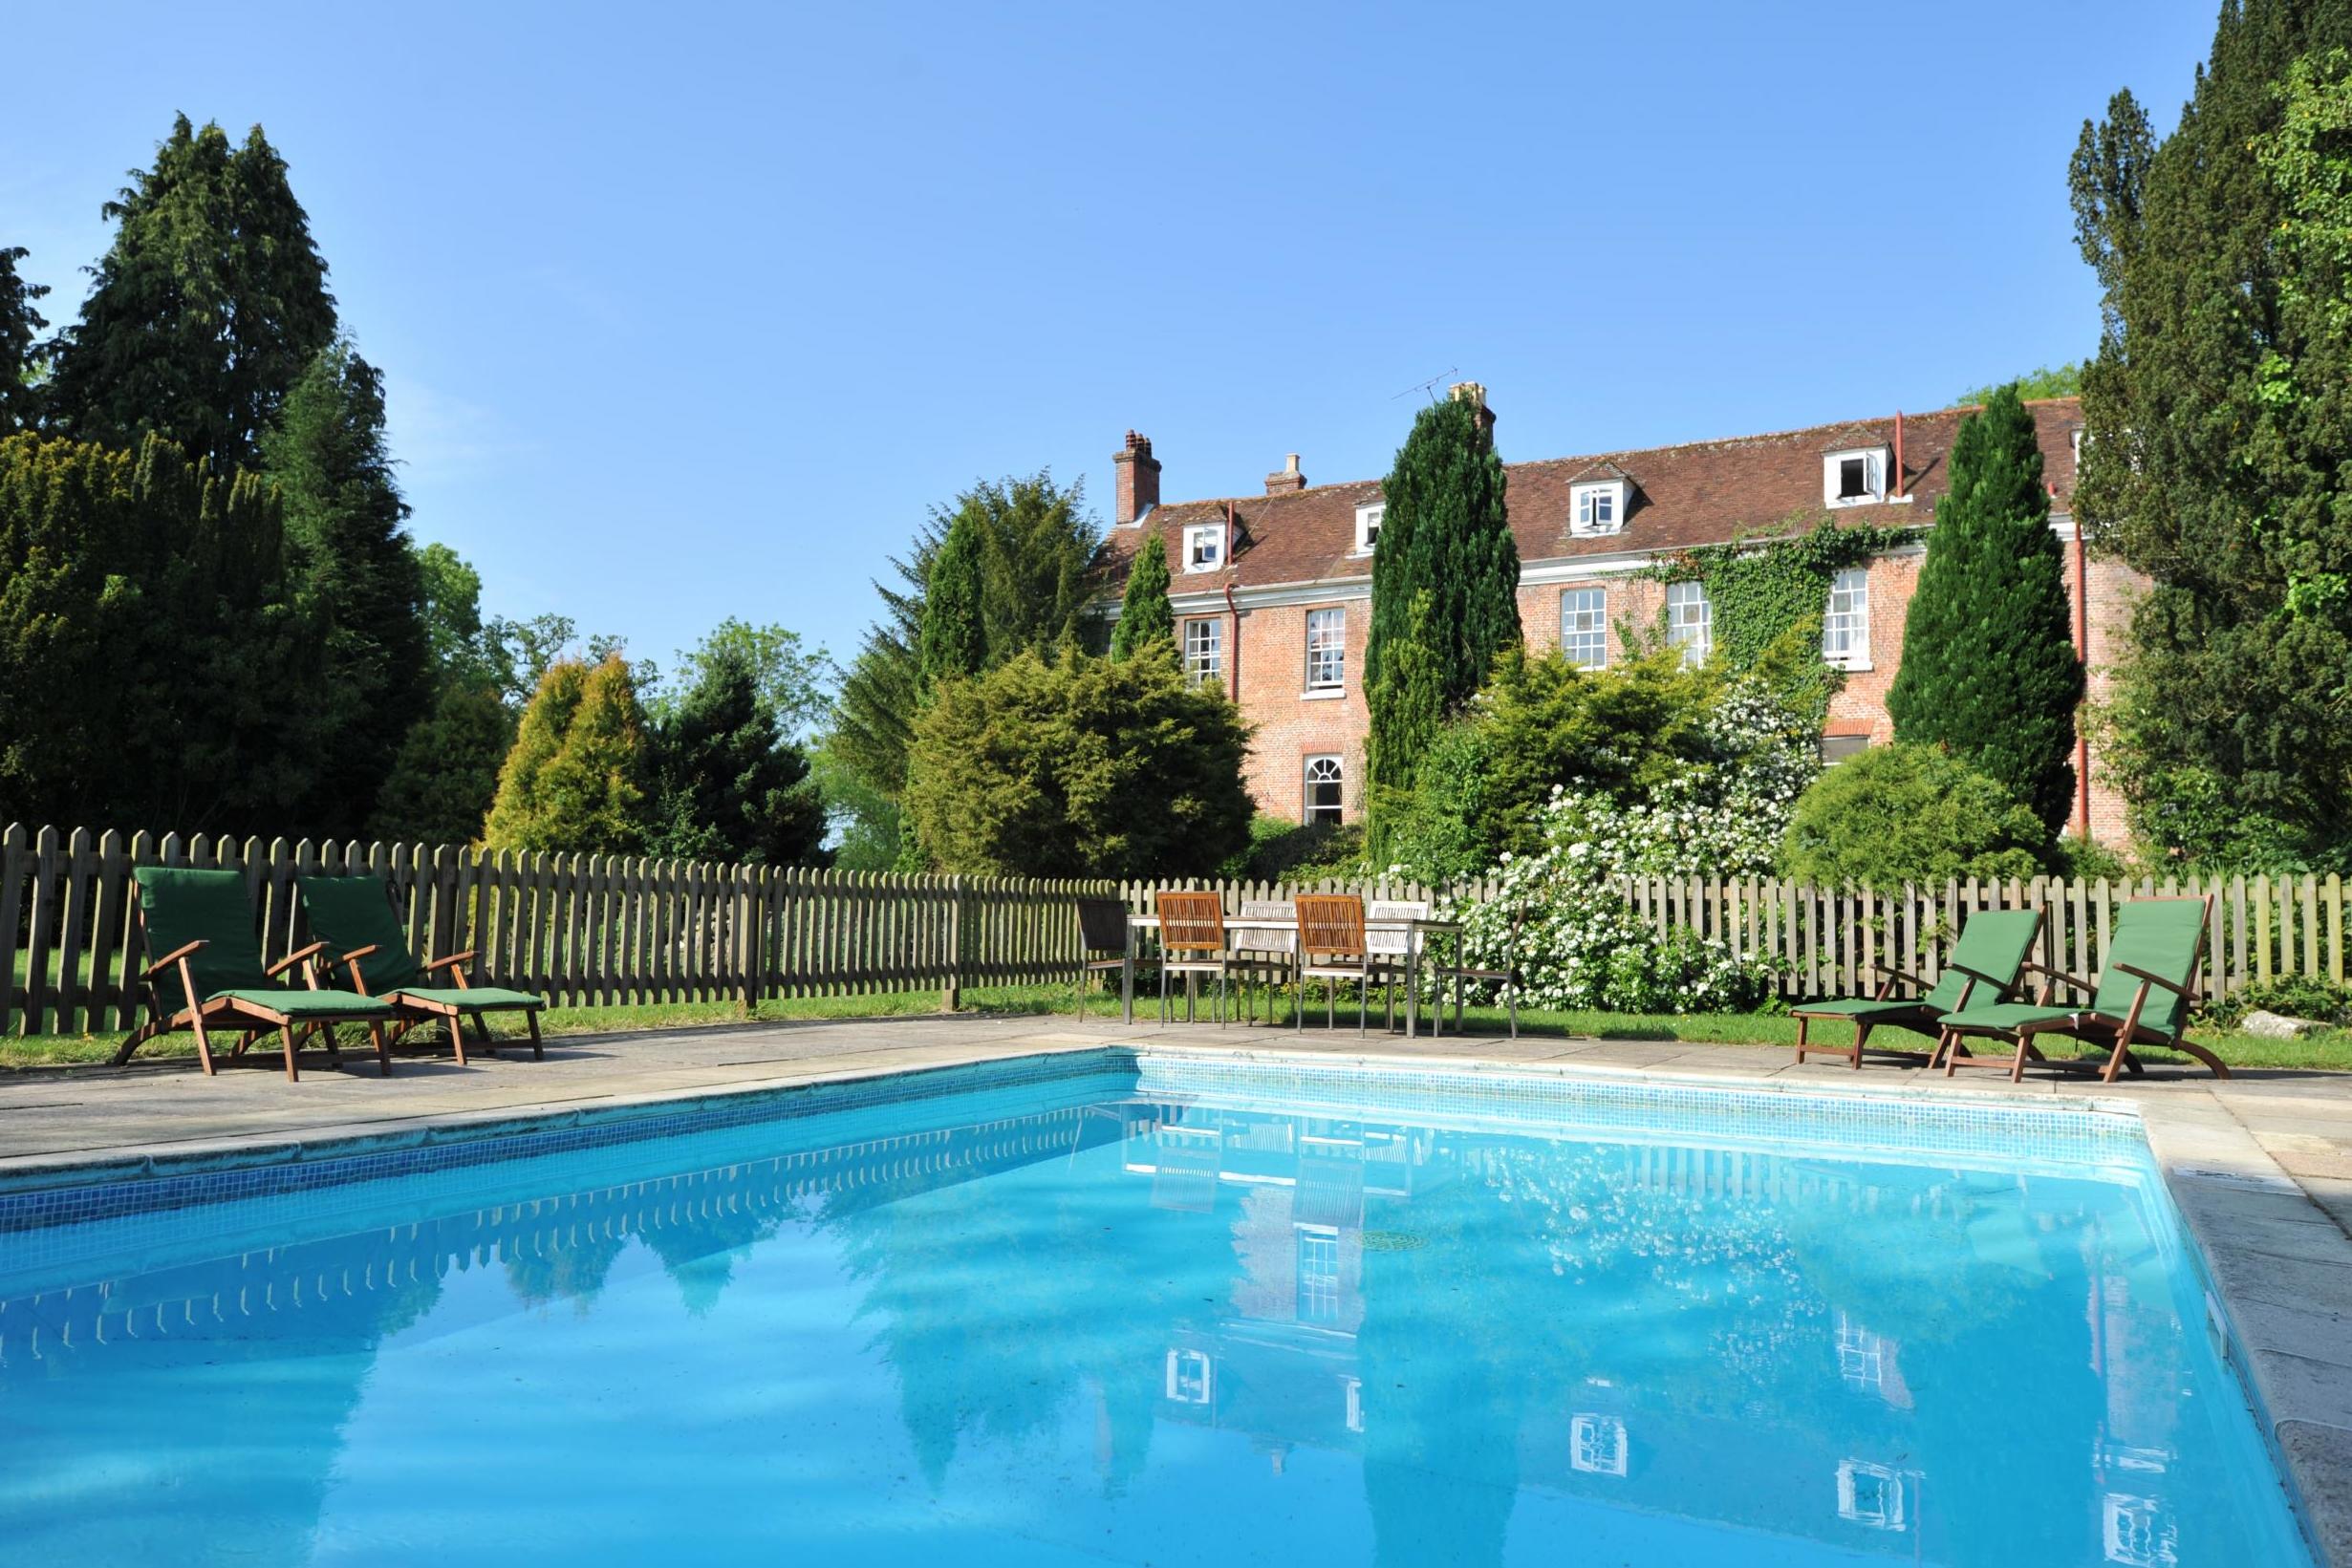 Enjoy a dip in New Park Manor's (heated) outdoor pool